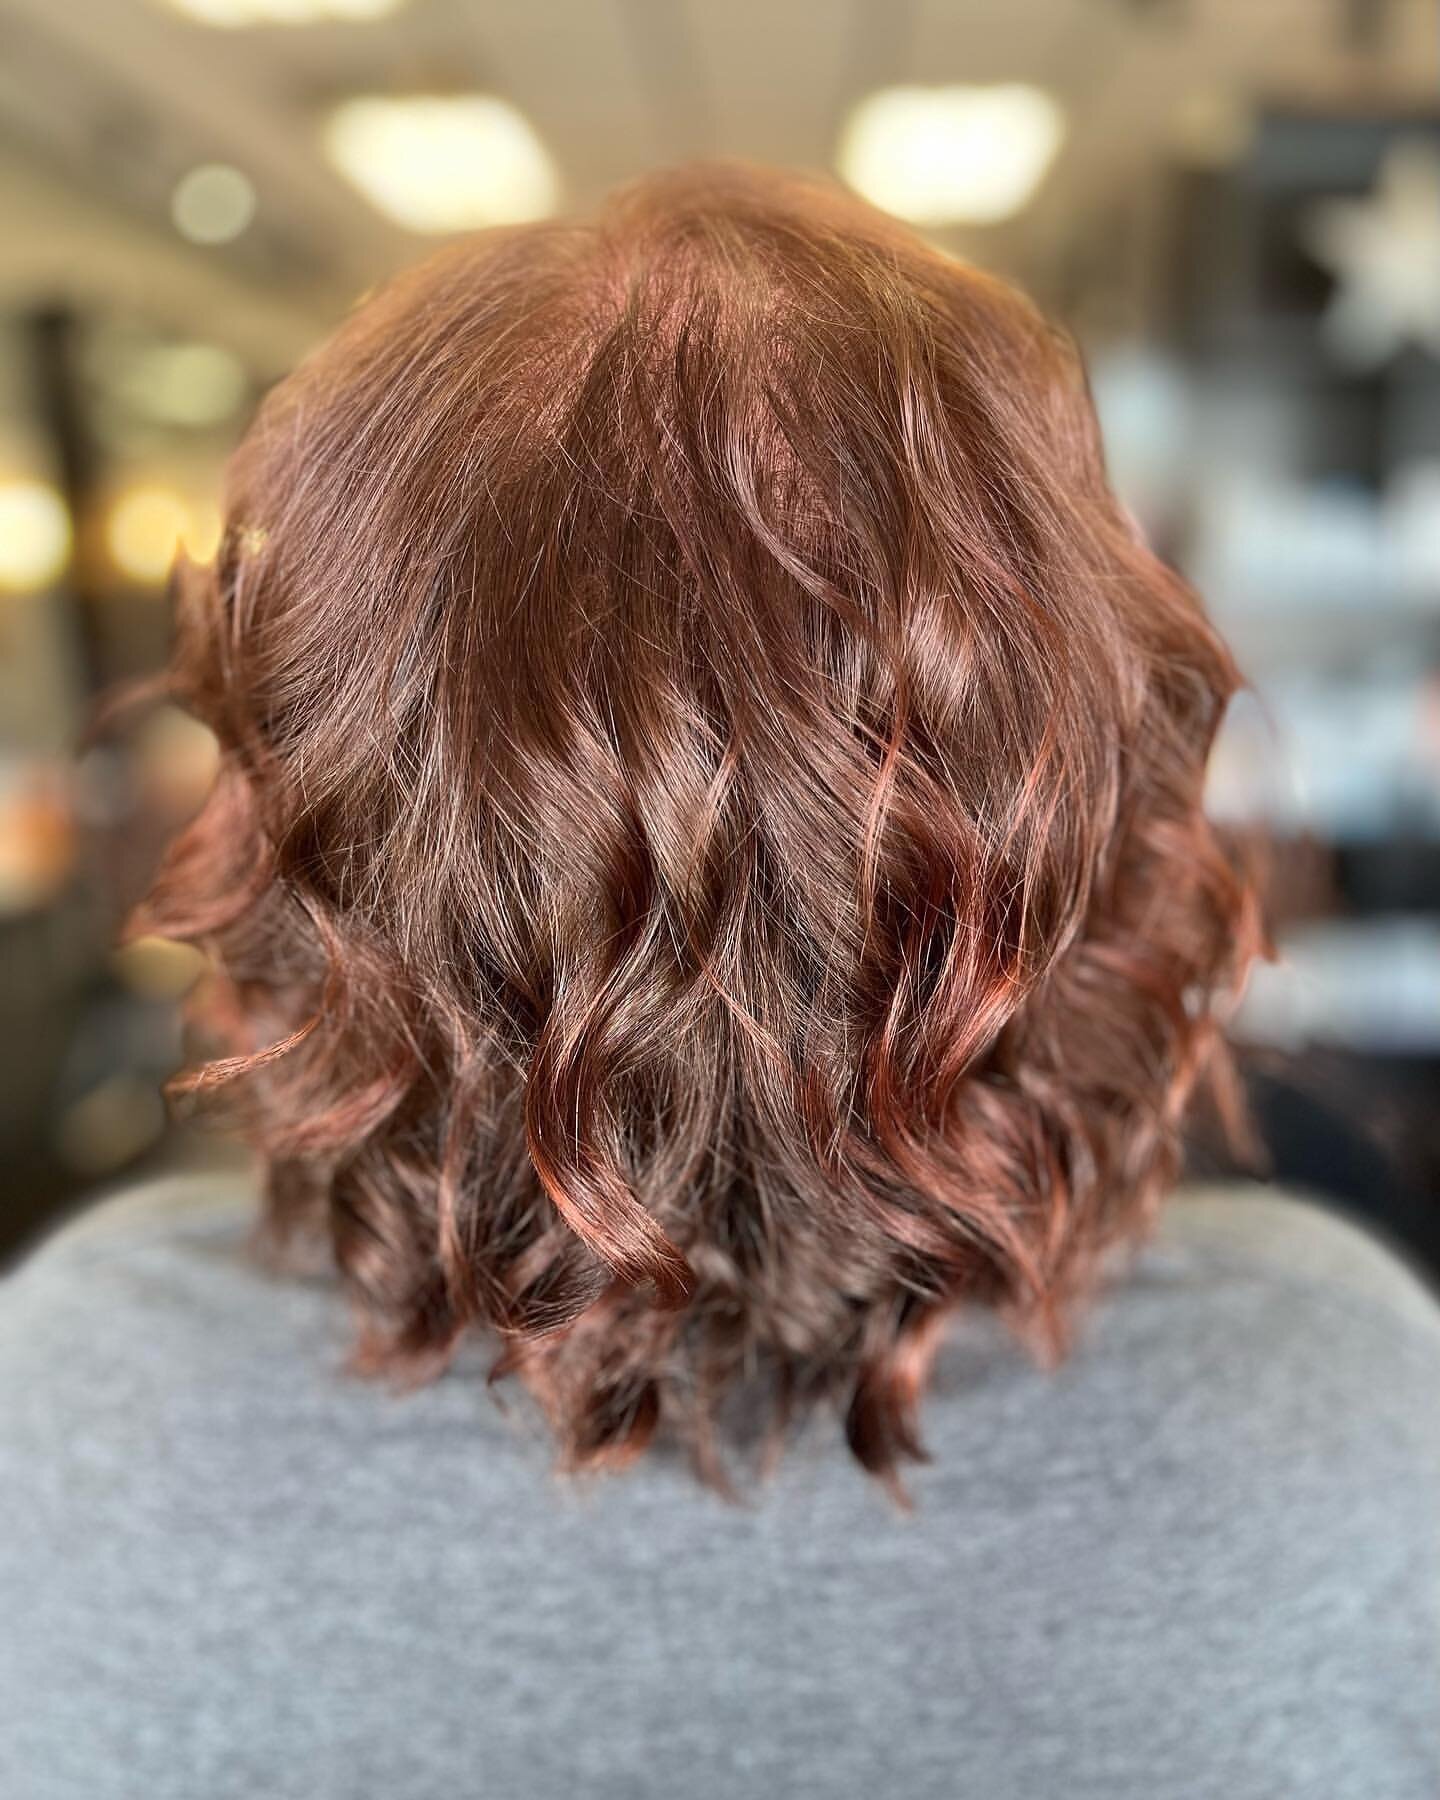 @karleighc.hair A good chop and a new color is always needed for the summer! I adore this red❤️

____________________________

&bull;I will be taking clients every Monday, Tuesday, Wednesday, Friday, and Saturday
&bull;Message me on Facebook or Insta